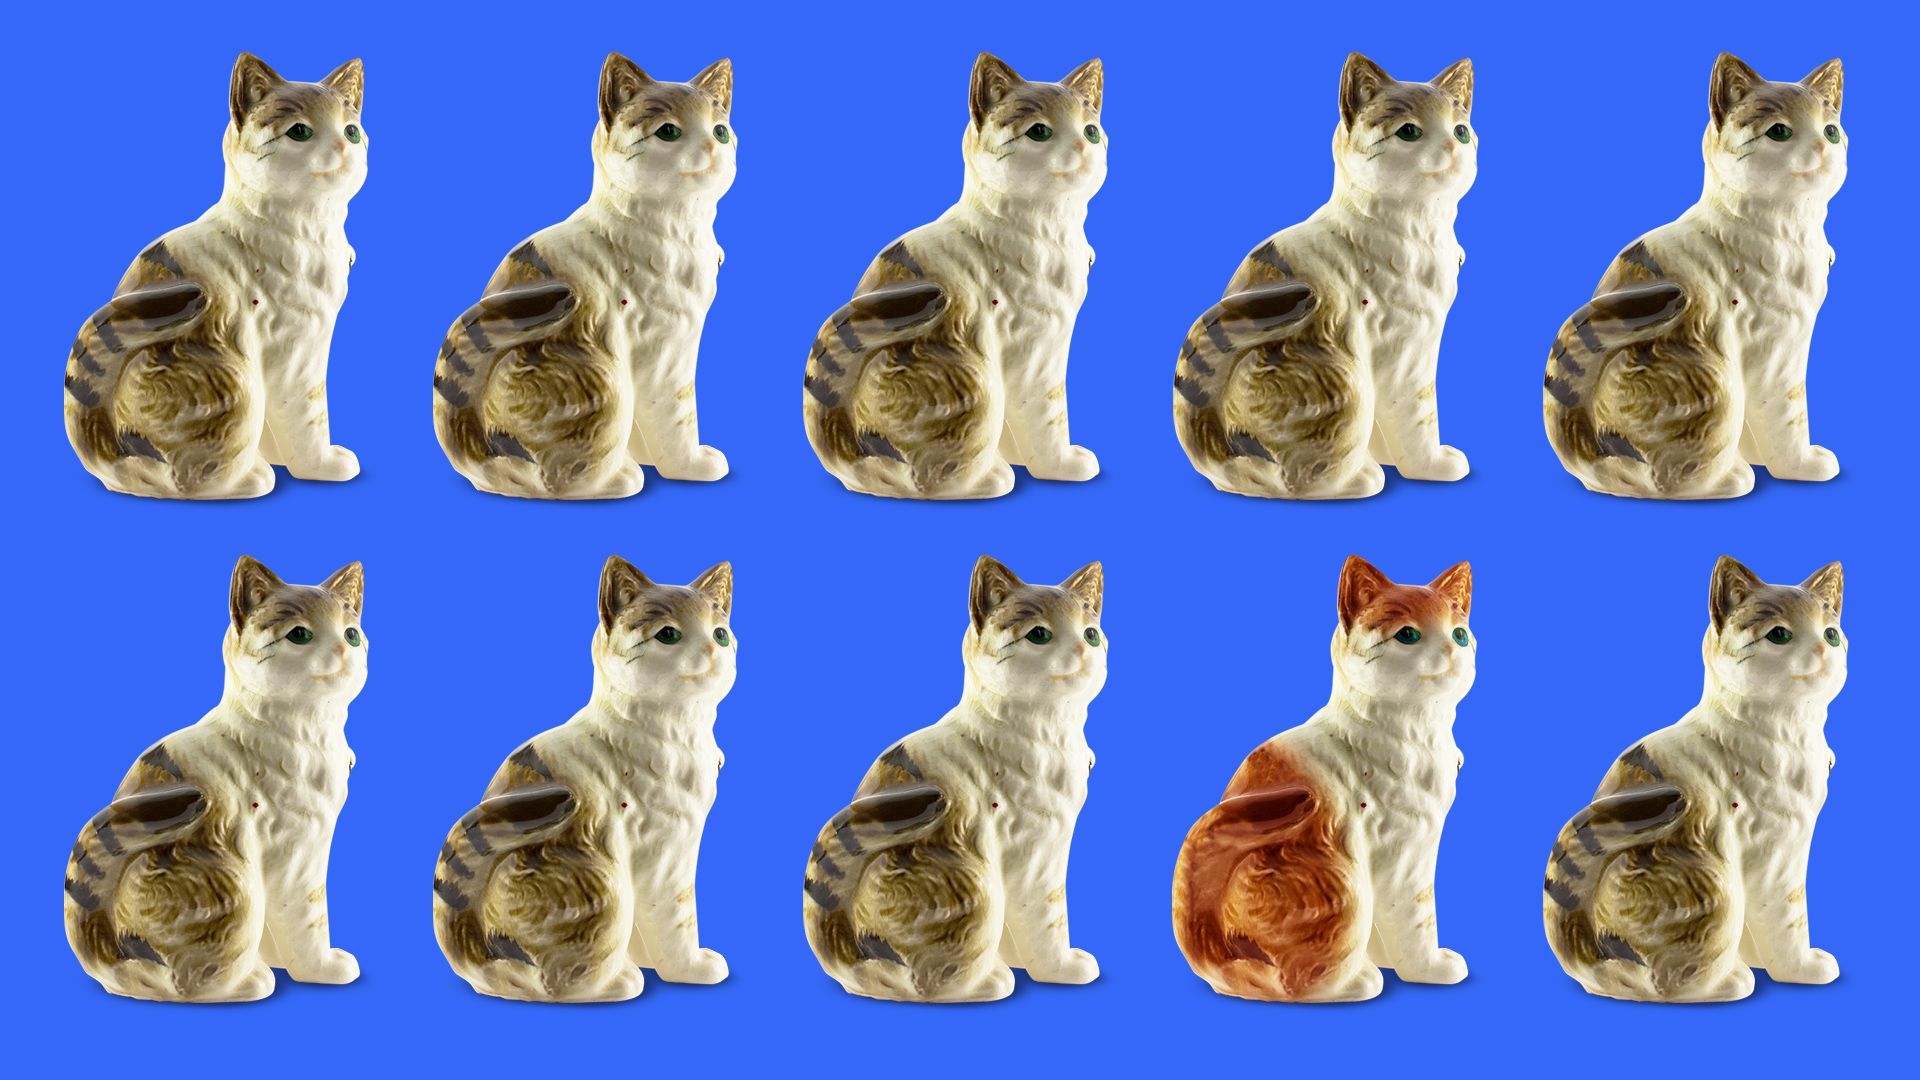 Illustration of a repeating pattern of porcelain cats, one is different than all the others.